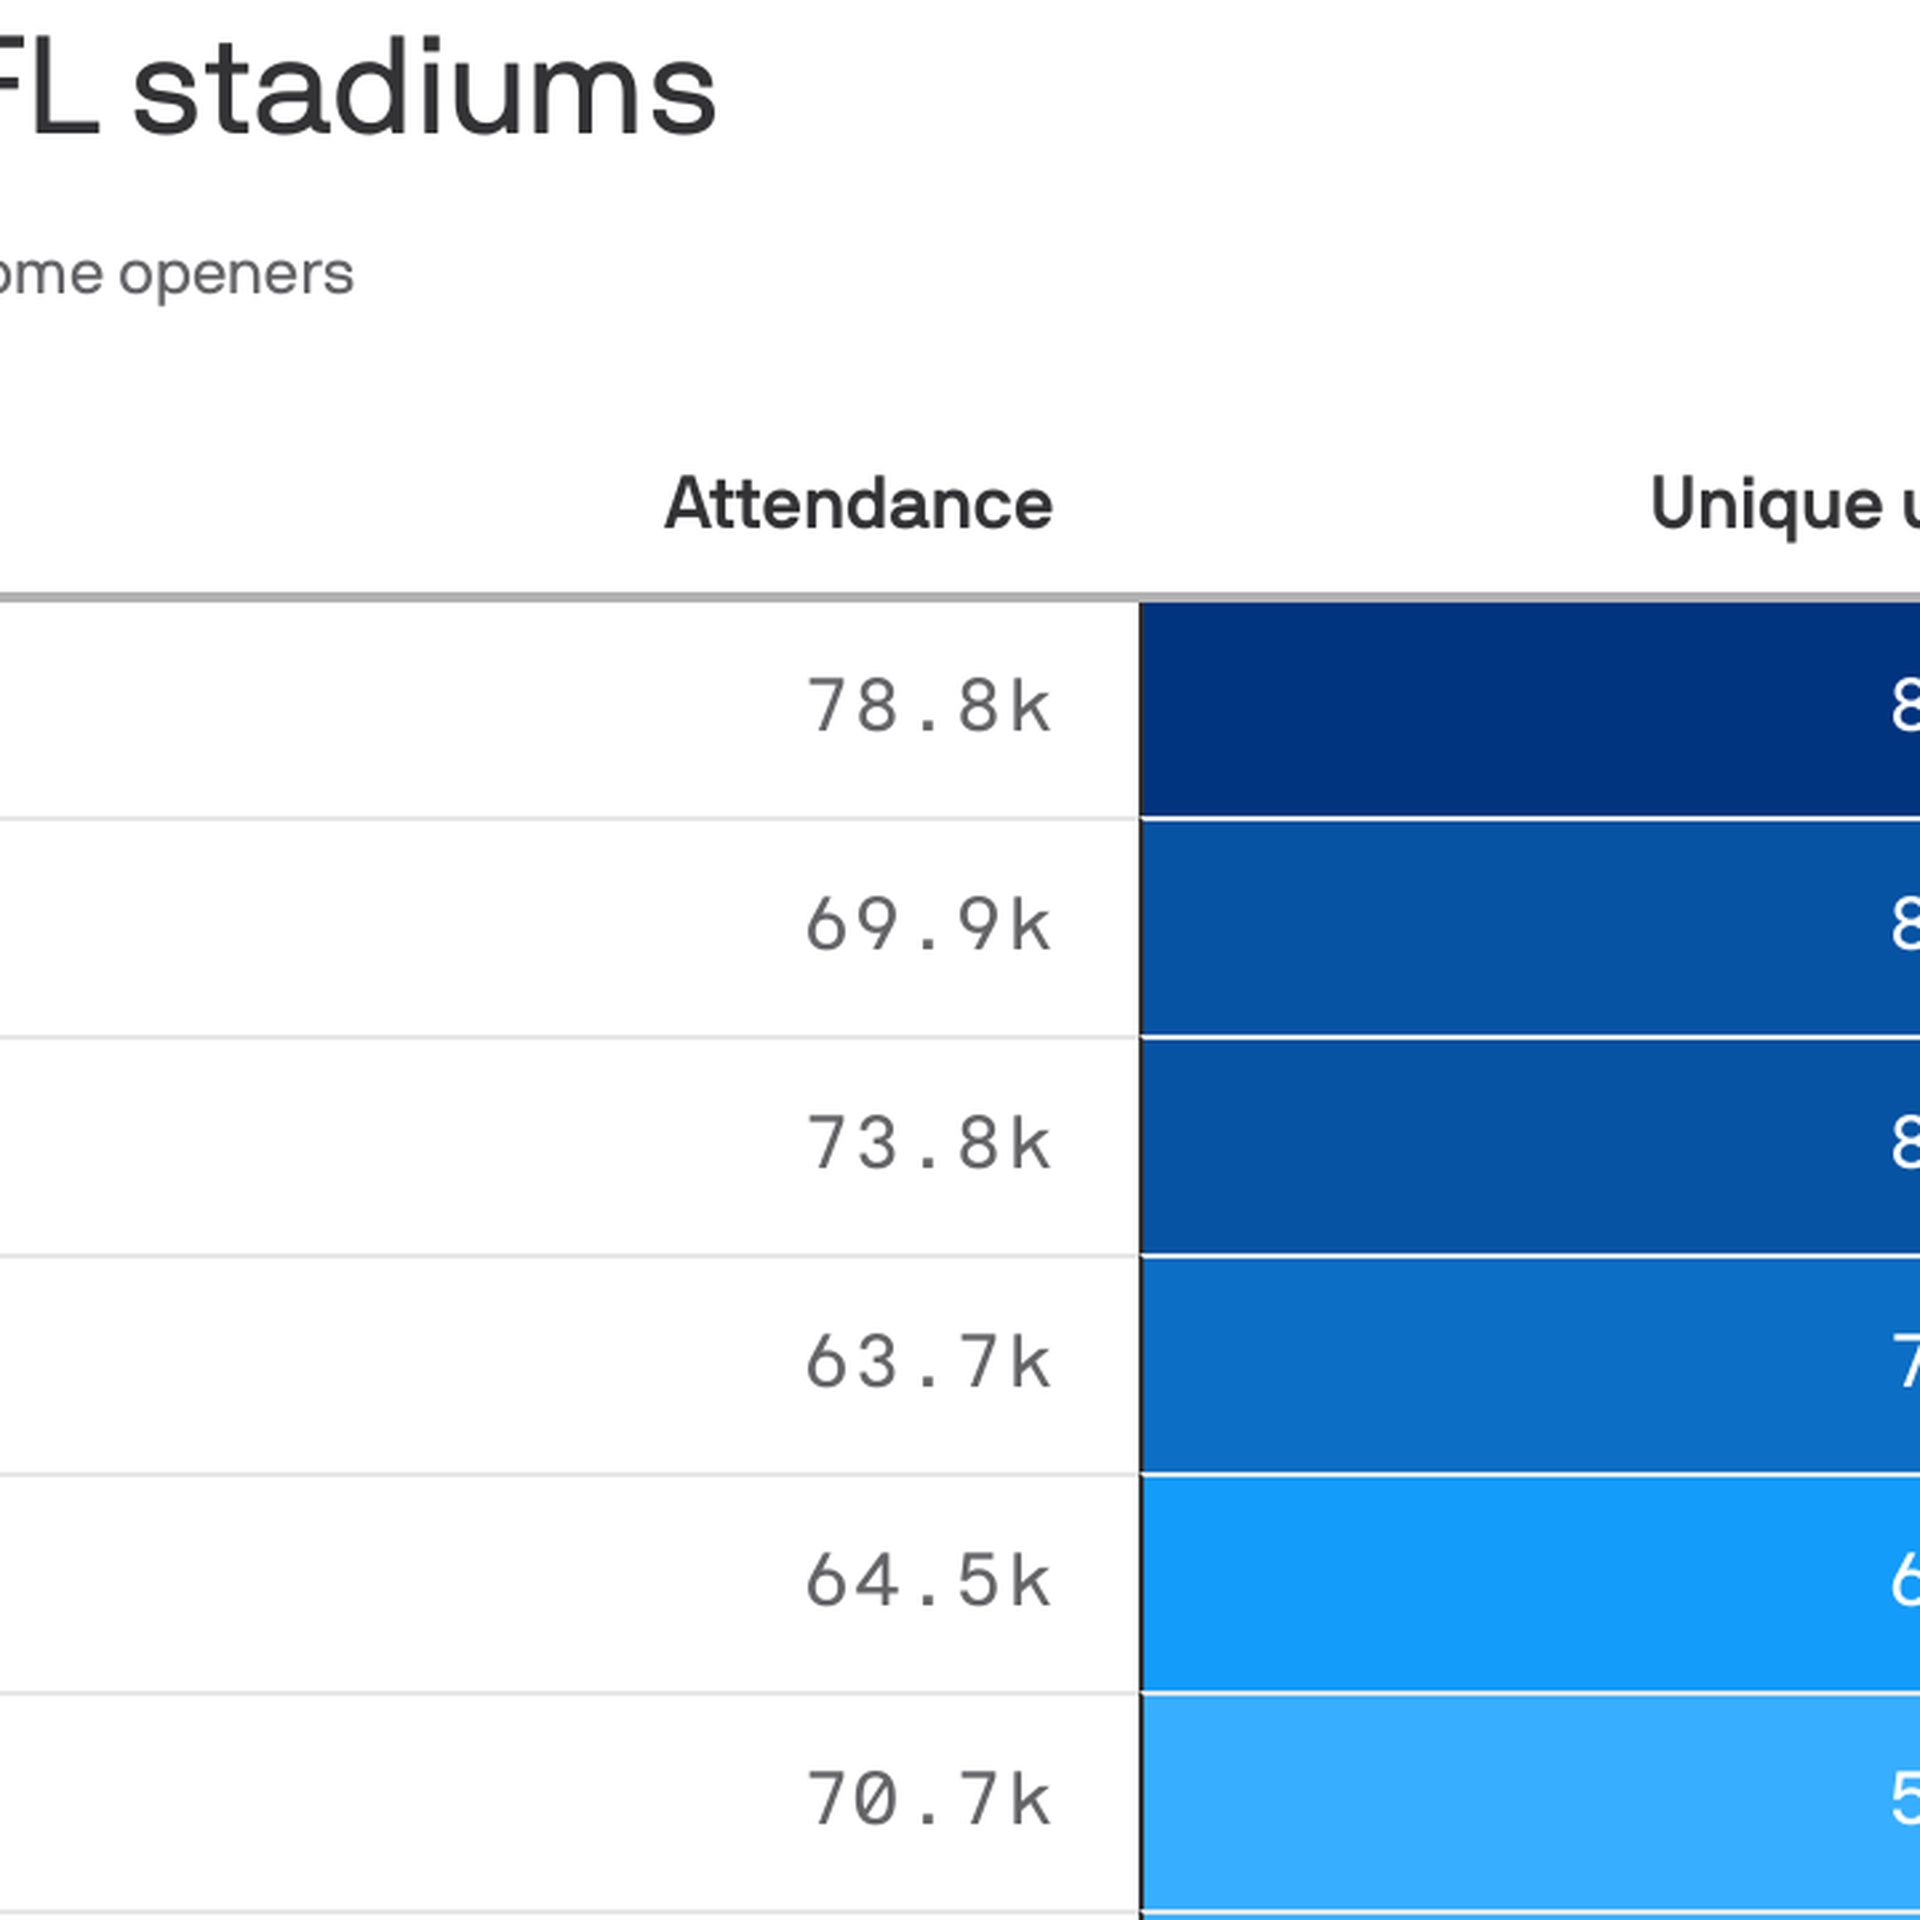 A table showing betting activity at NFL stadiums